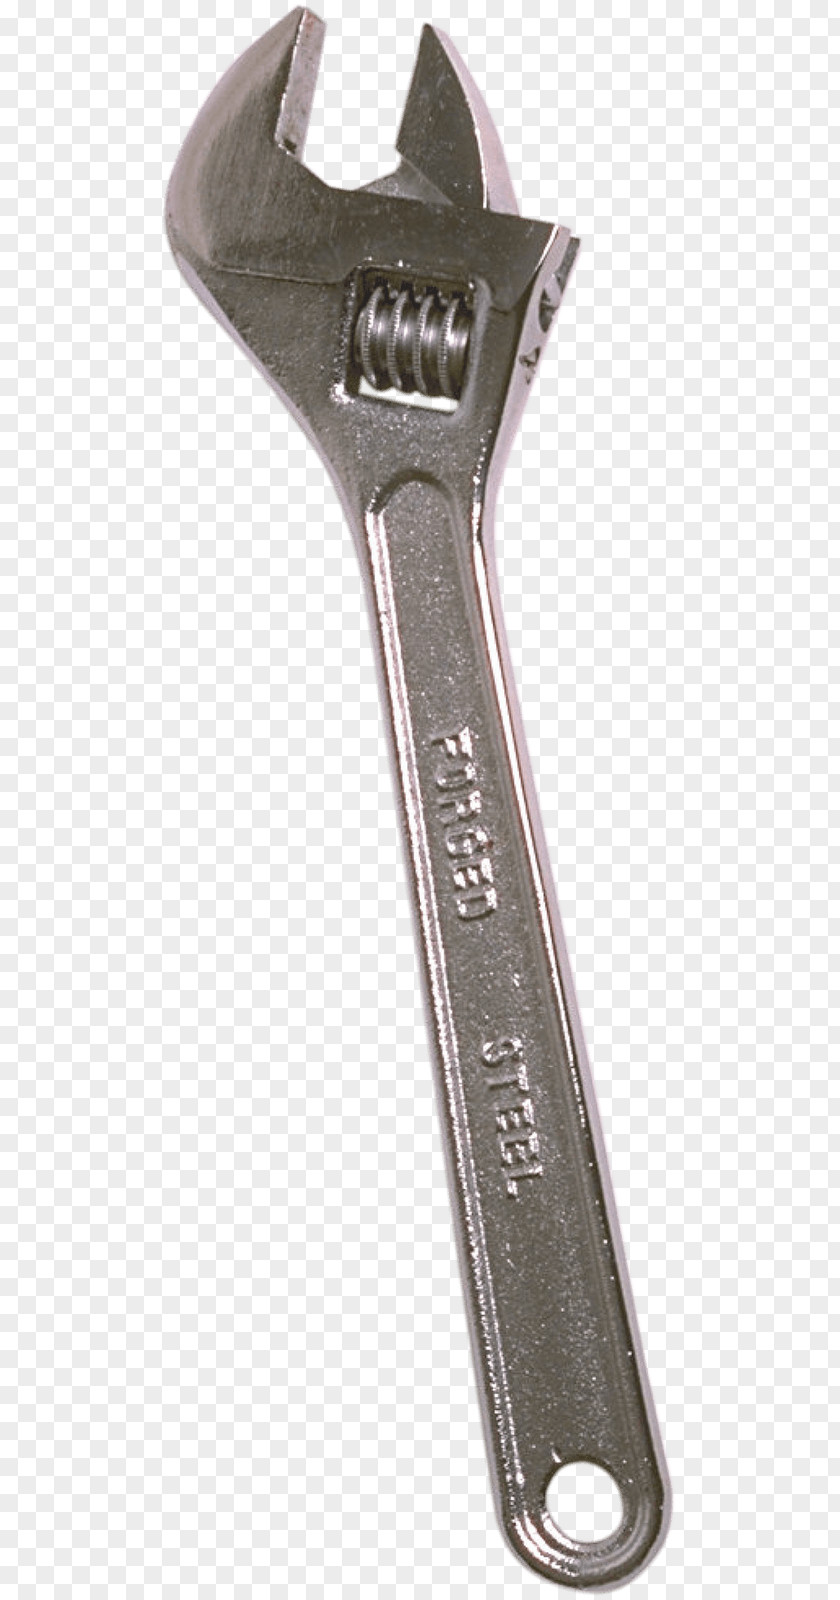 Wrench Spanner Image Layers GIMP PNG